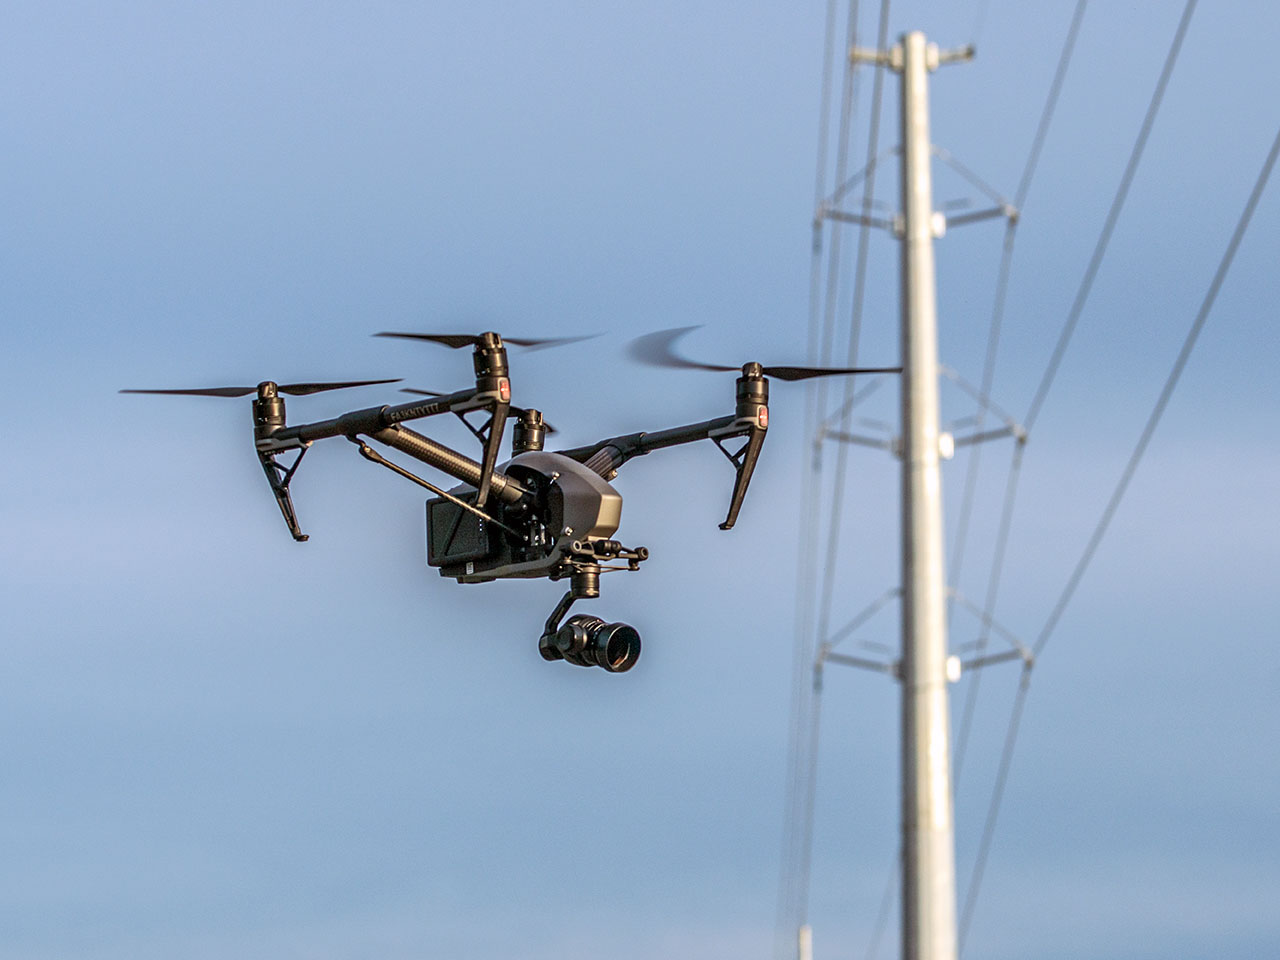 Oncor uses a fleet of drones to safely monitor and inspect more than 100,000 miles of power lines across the Lone Star State.